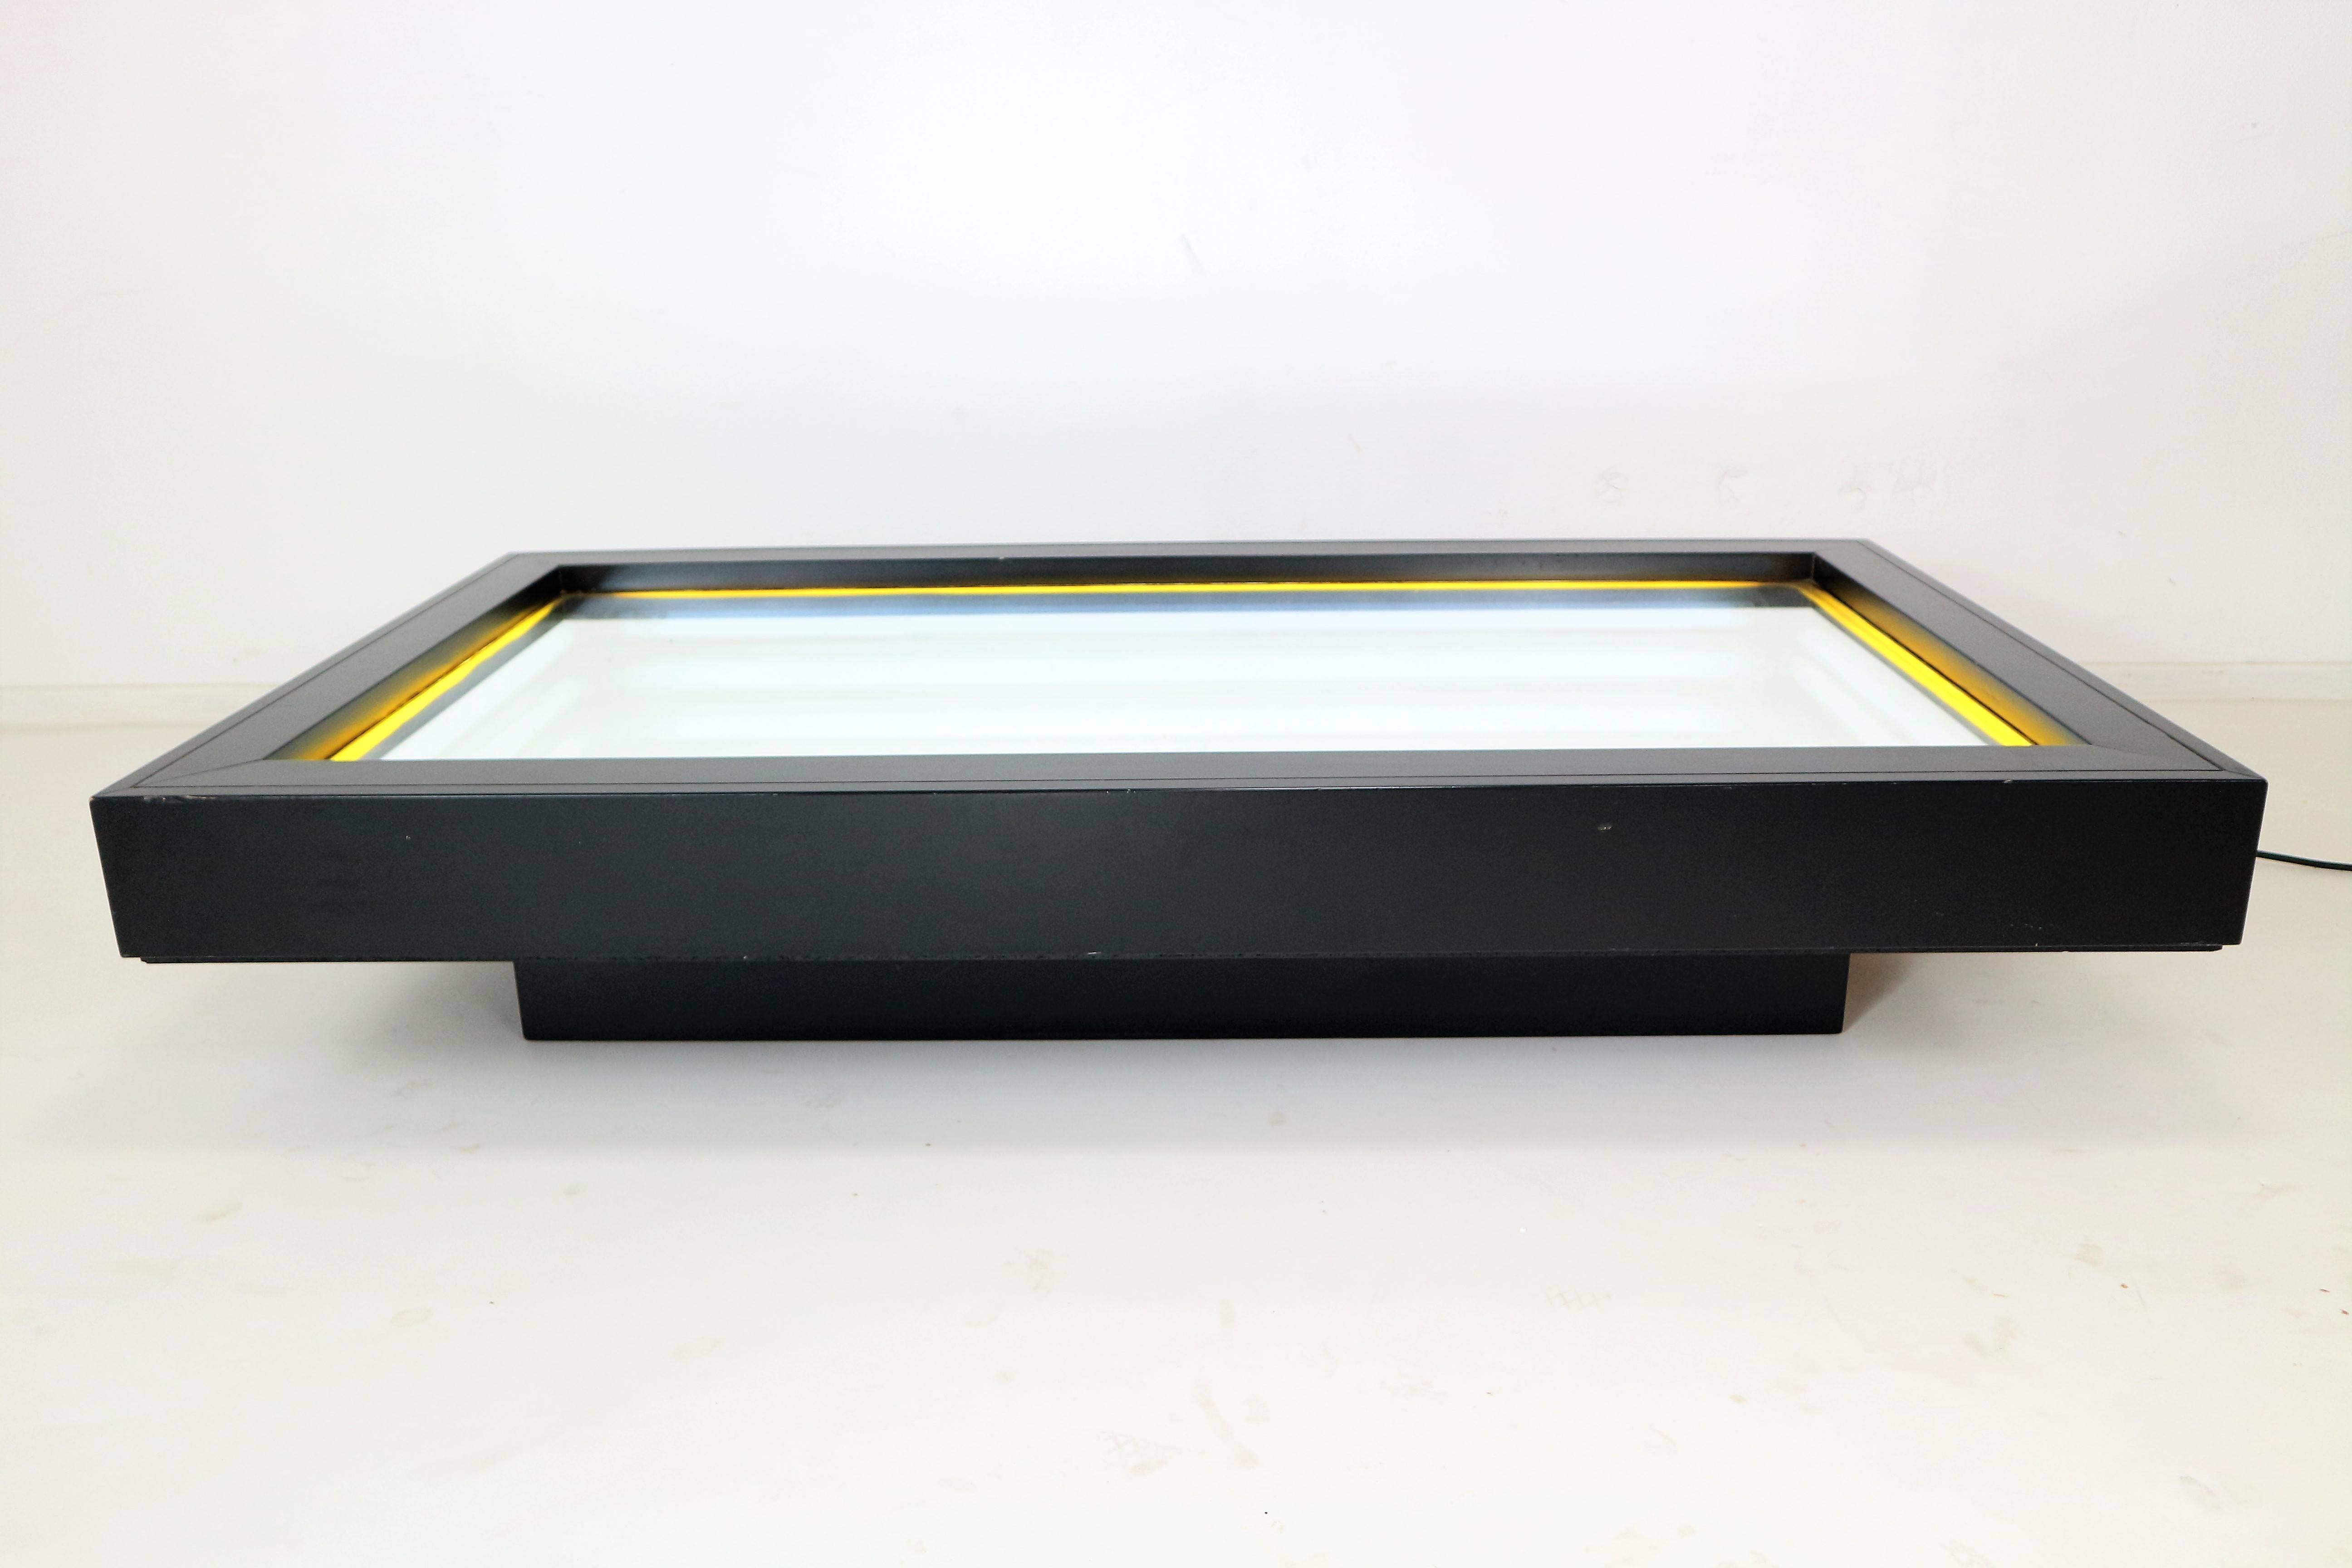 Rare Christian Megert 'lichtobject' limited Op Art coffee table/lighting object for Rosenthal Studiolinie. Designed 1978, just 100 were made! Beech frame, painted black, mirror glass, three-dimensional lighting via reflection, neon tubes. Slight